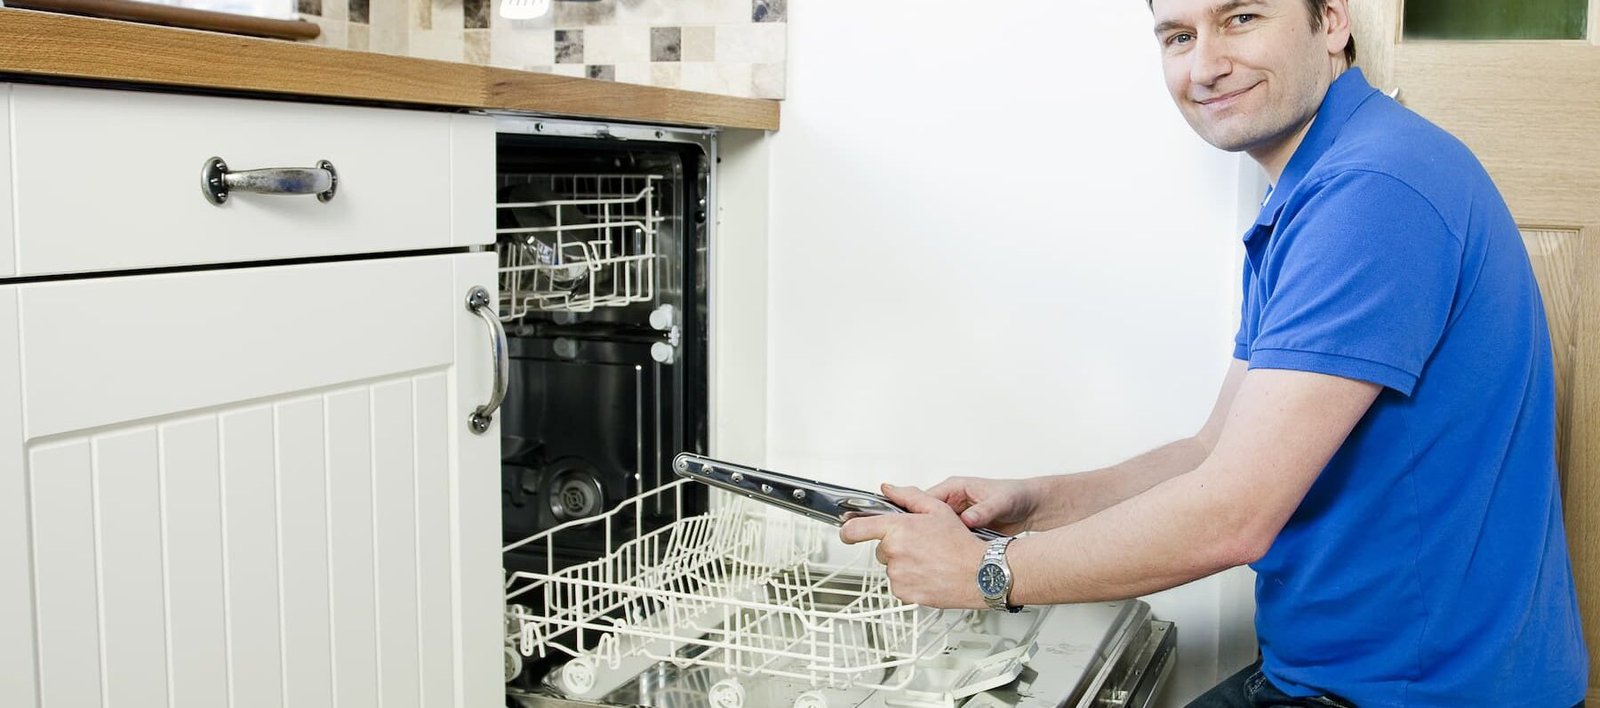 appliance installation services by fix it right appliance repair